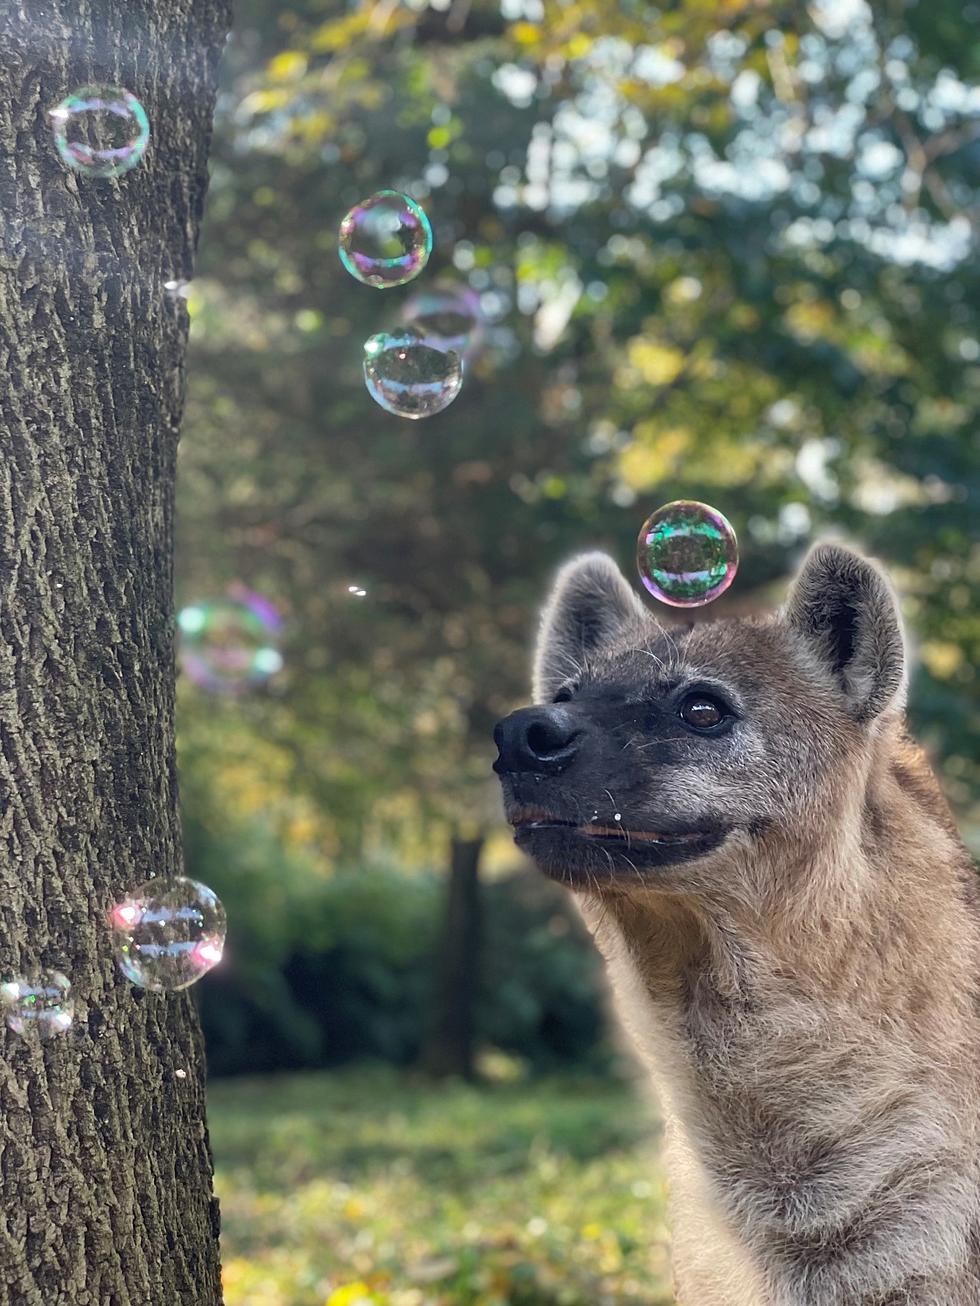 Mendon Zoo Adds Bubble Machine and Epic Animal Cuteness